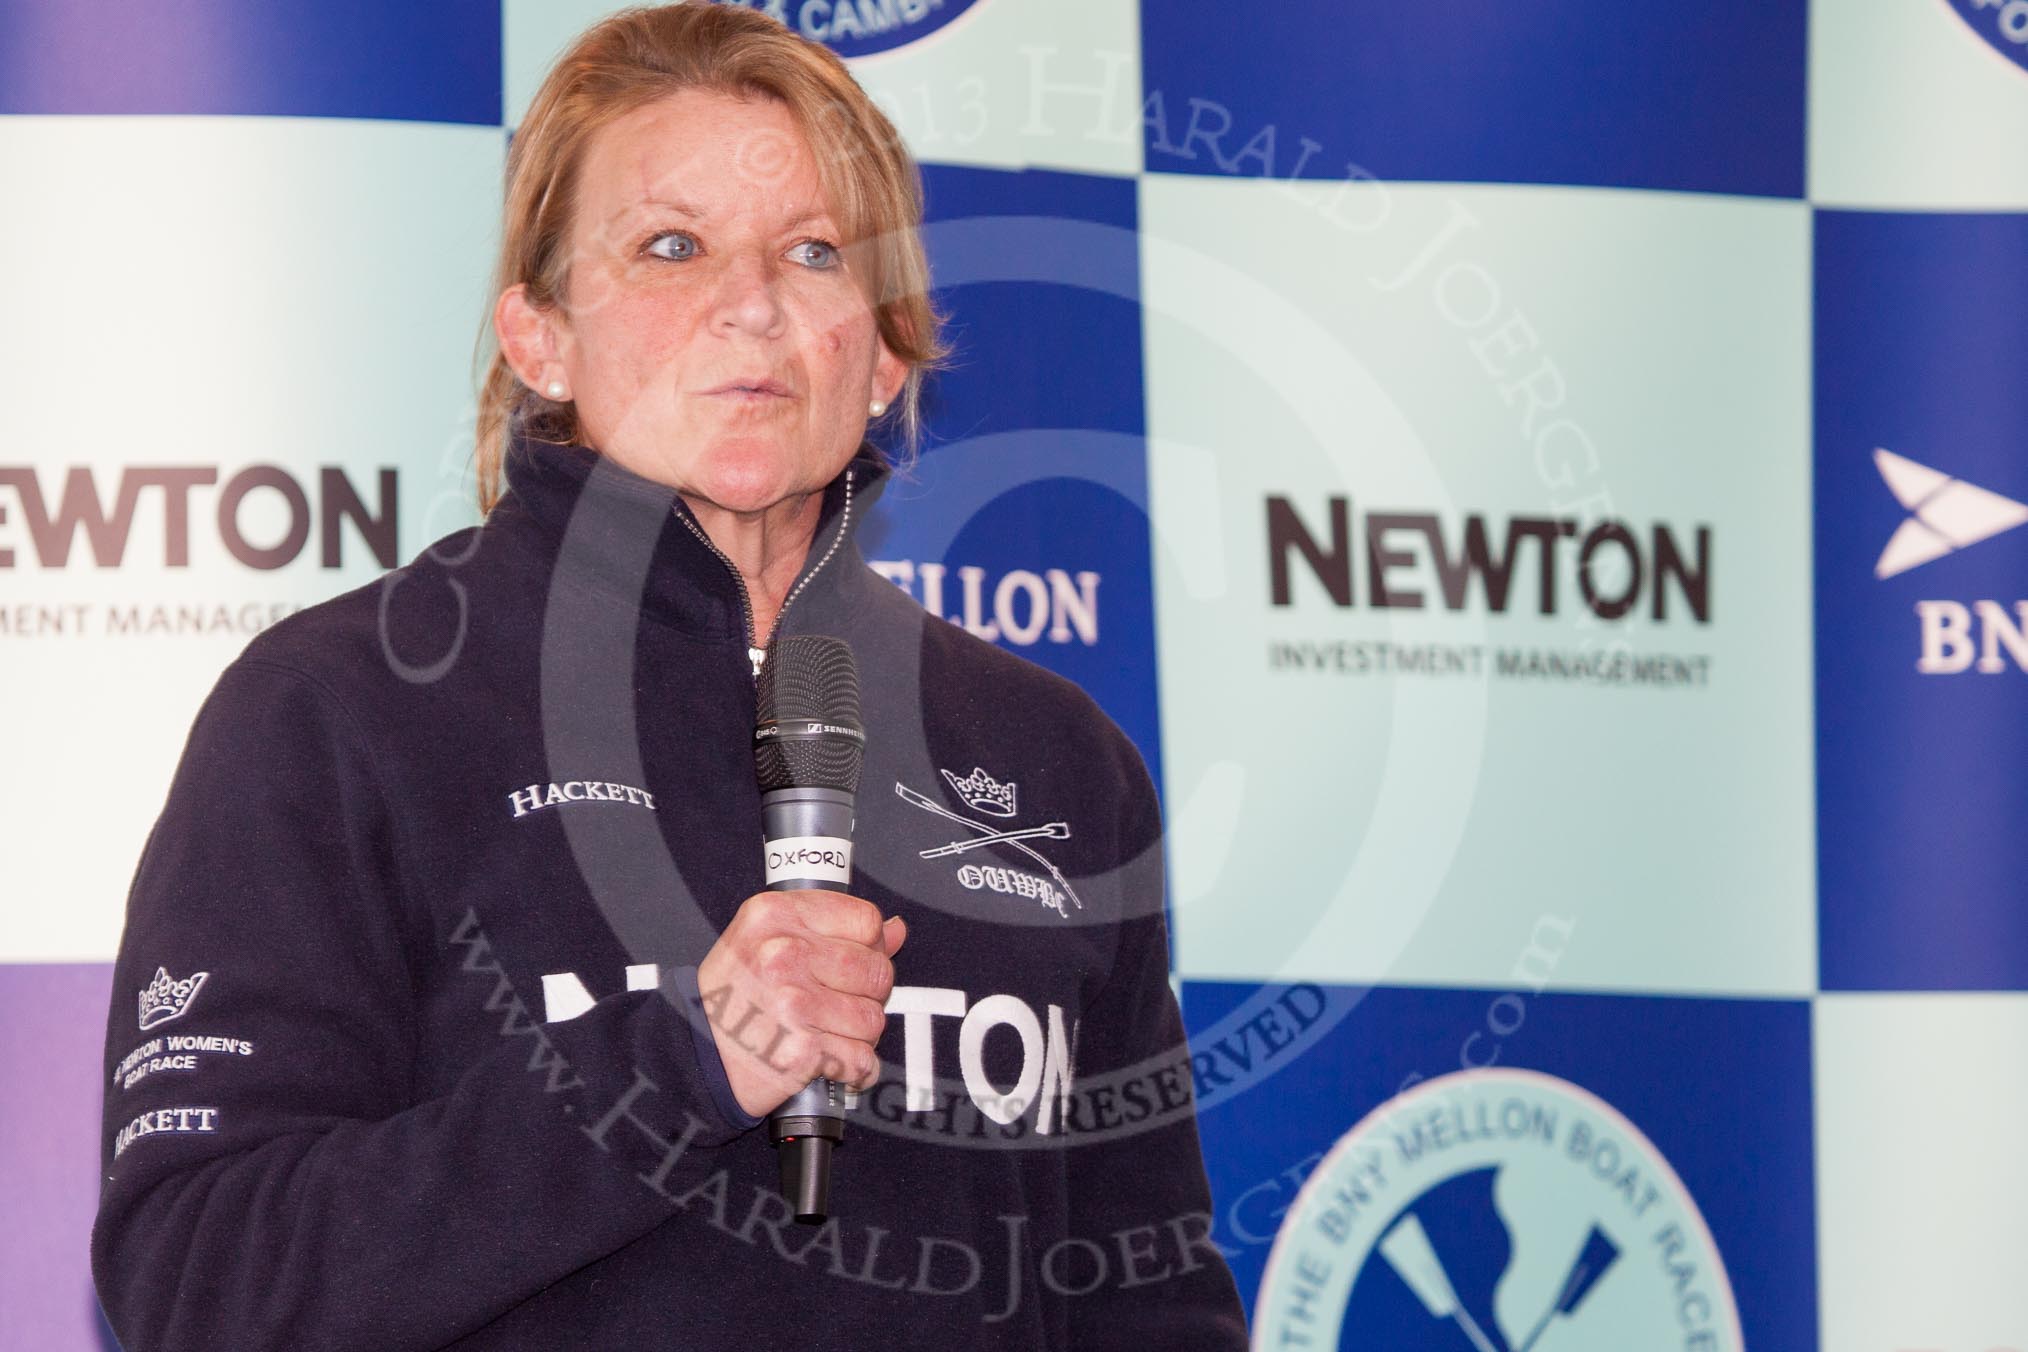 The Boat Race season 2013 - Crew Announcement and Weigh In: OUWBC Head Coach Christine talking about the Women's Boat Race..
BNY Mellon Centre,
London EC4V 4LA,

United Kingdom,
on 04 March 2013 at 10:24, image #41